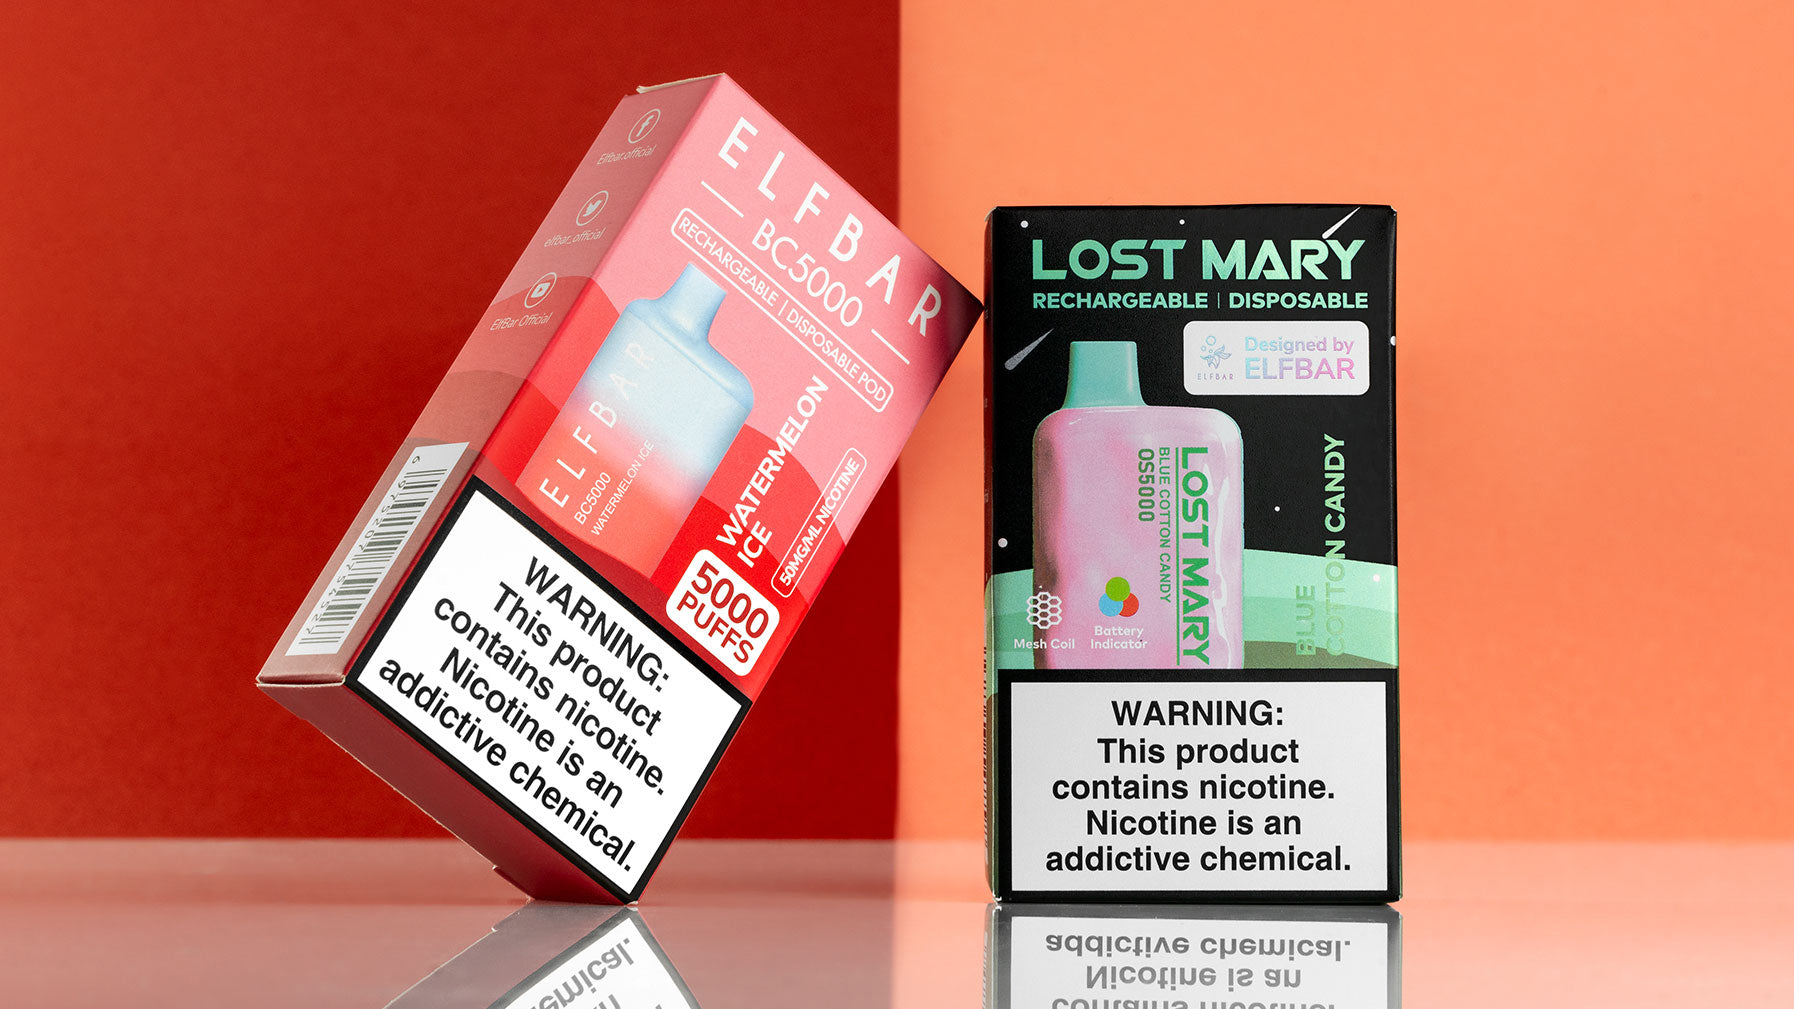 elf bar vs lost bc mary os5000 disposable mary